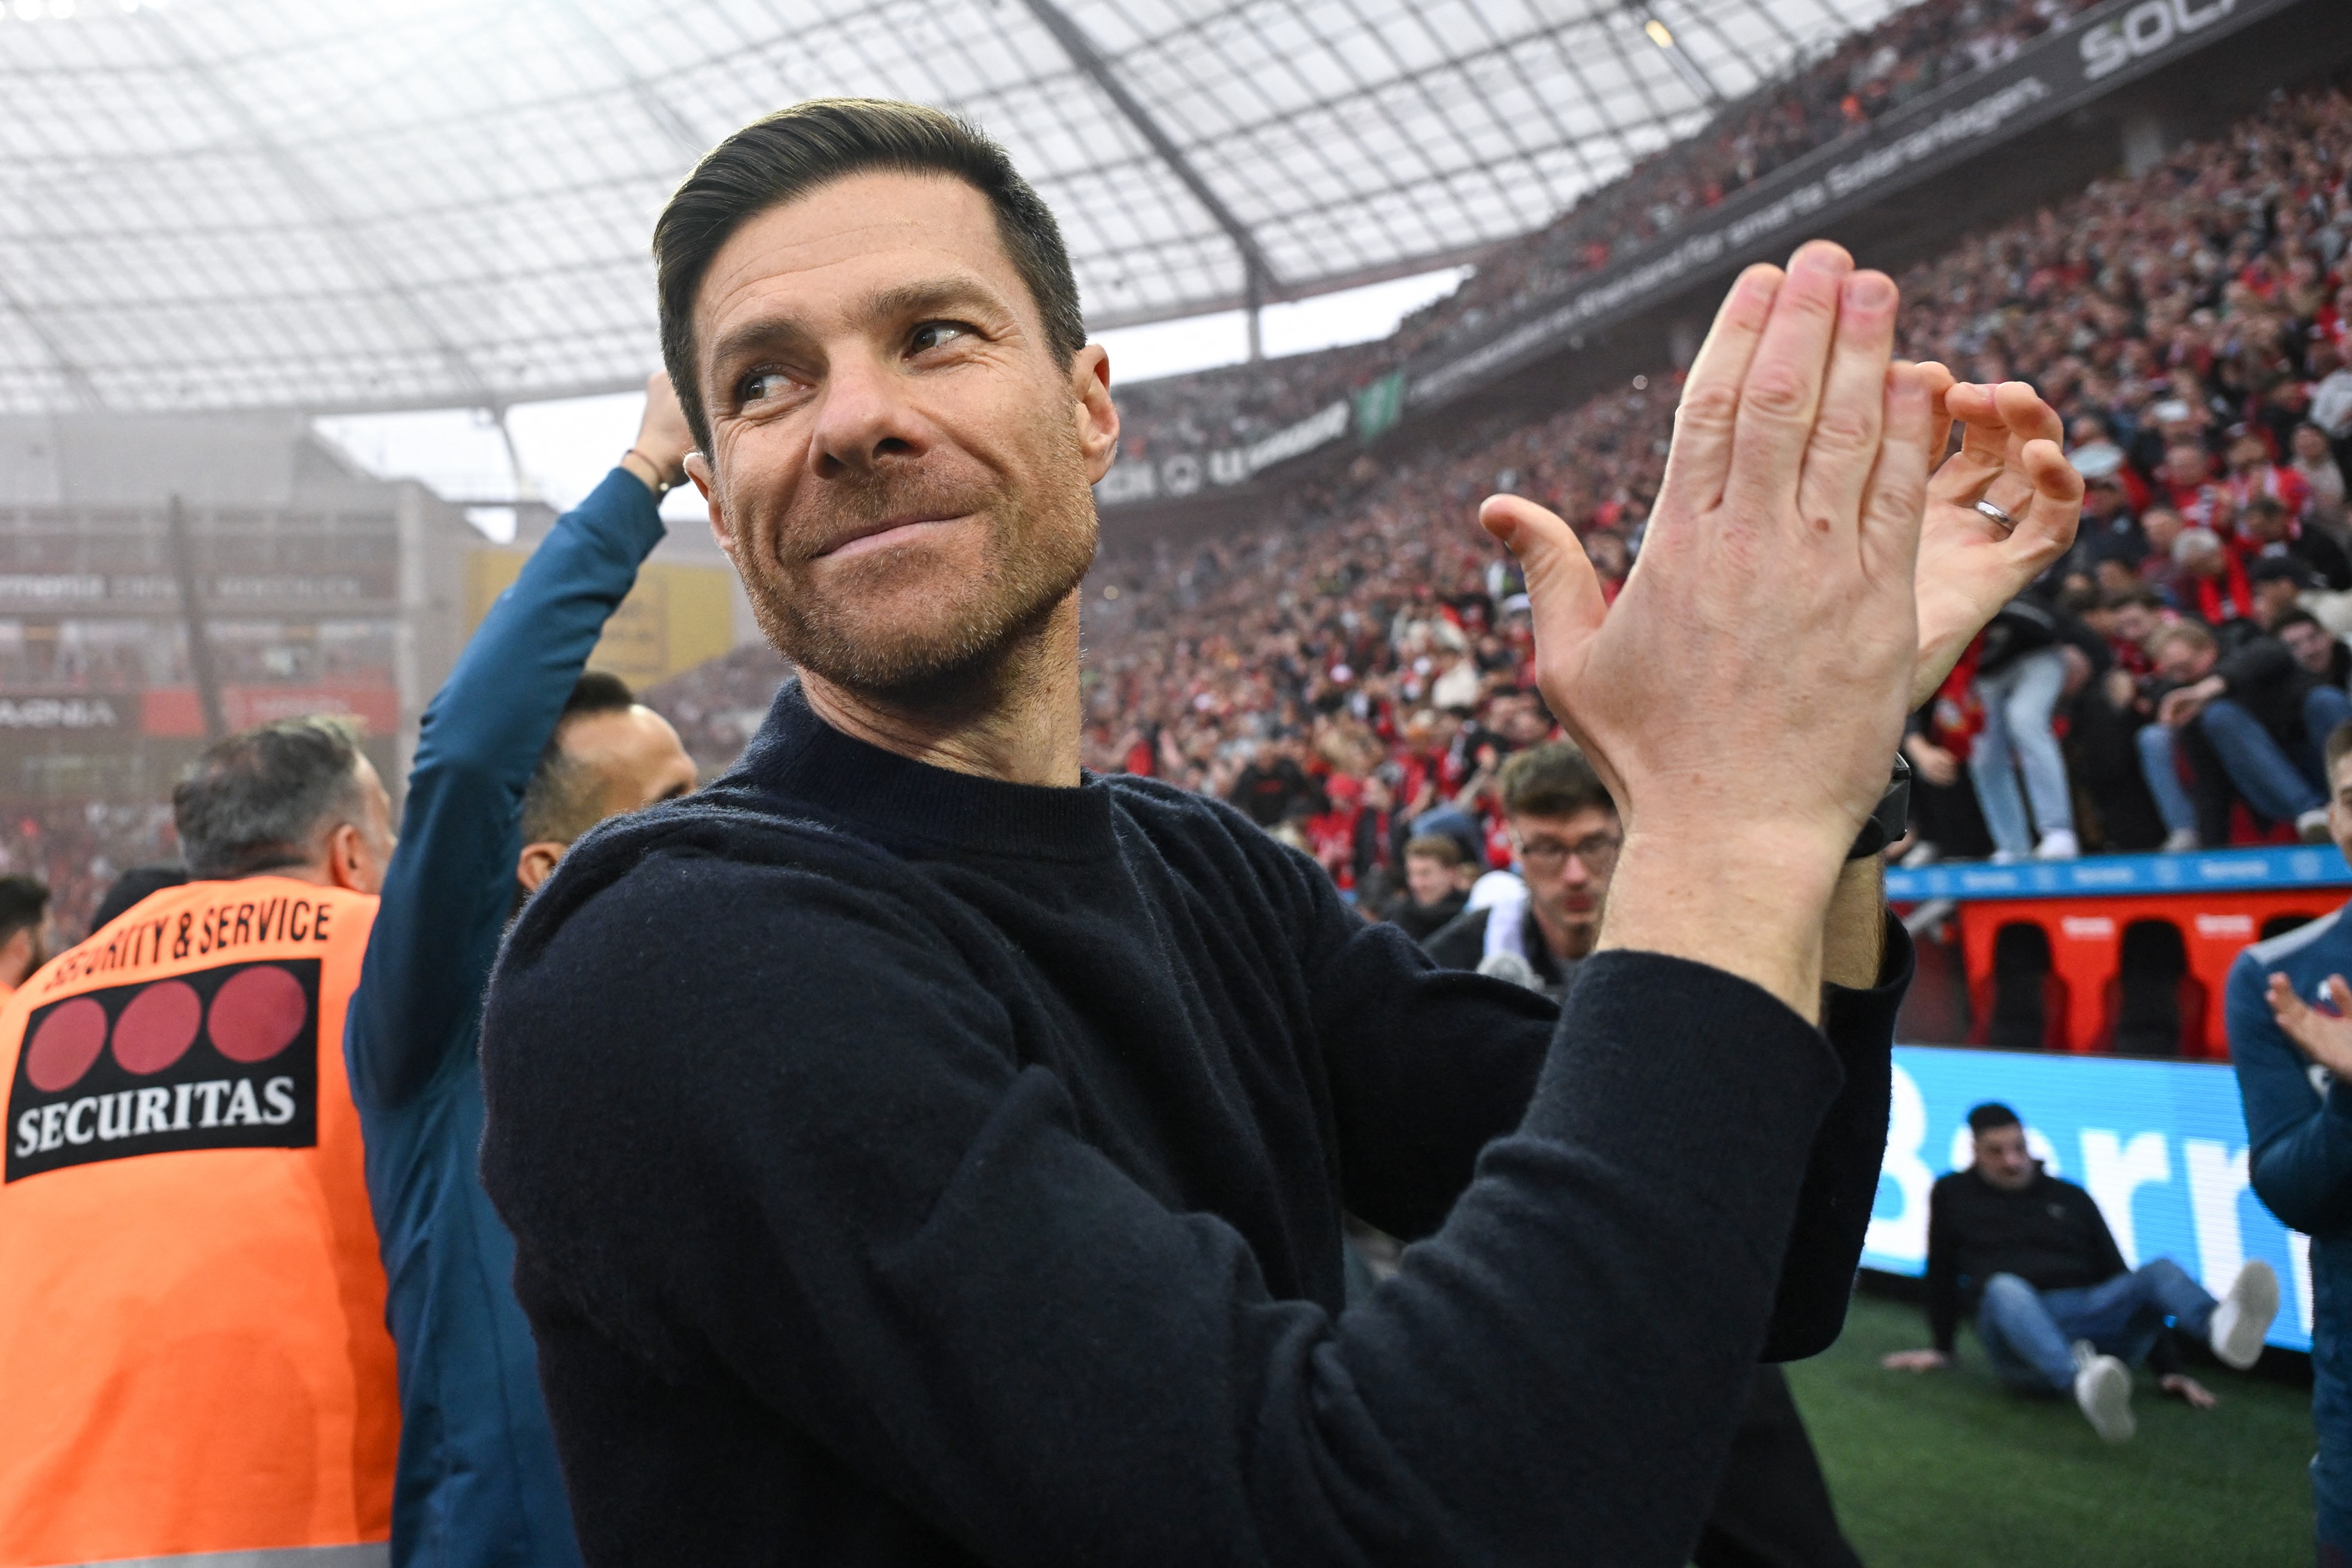 Strong theory now emerging about Xabi Alonso following Liverpool manager snub